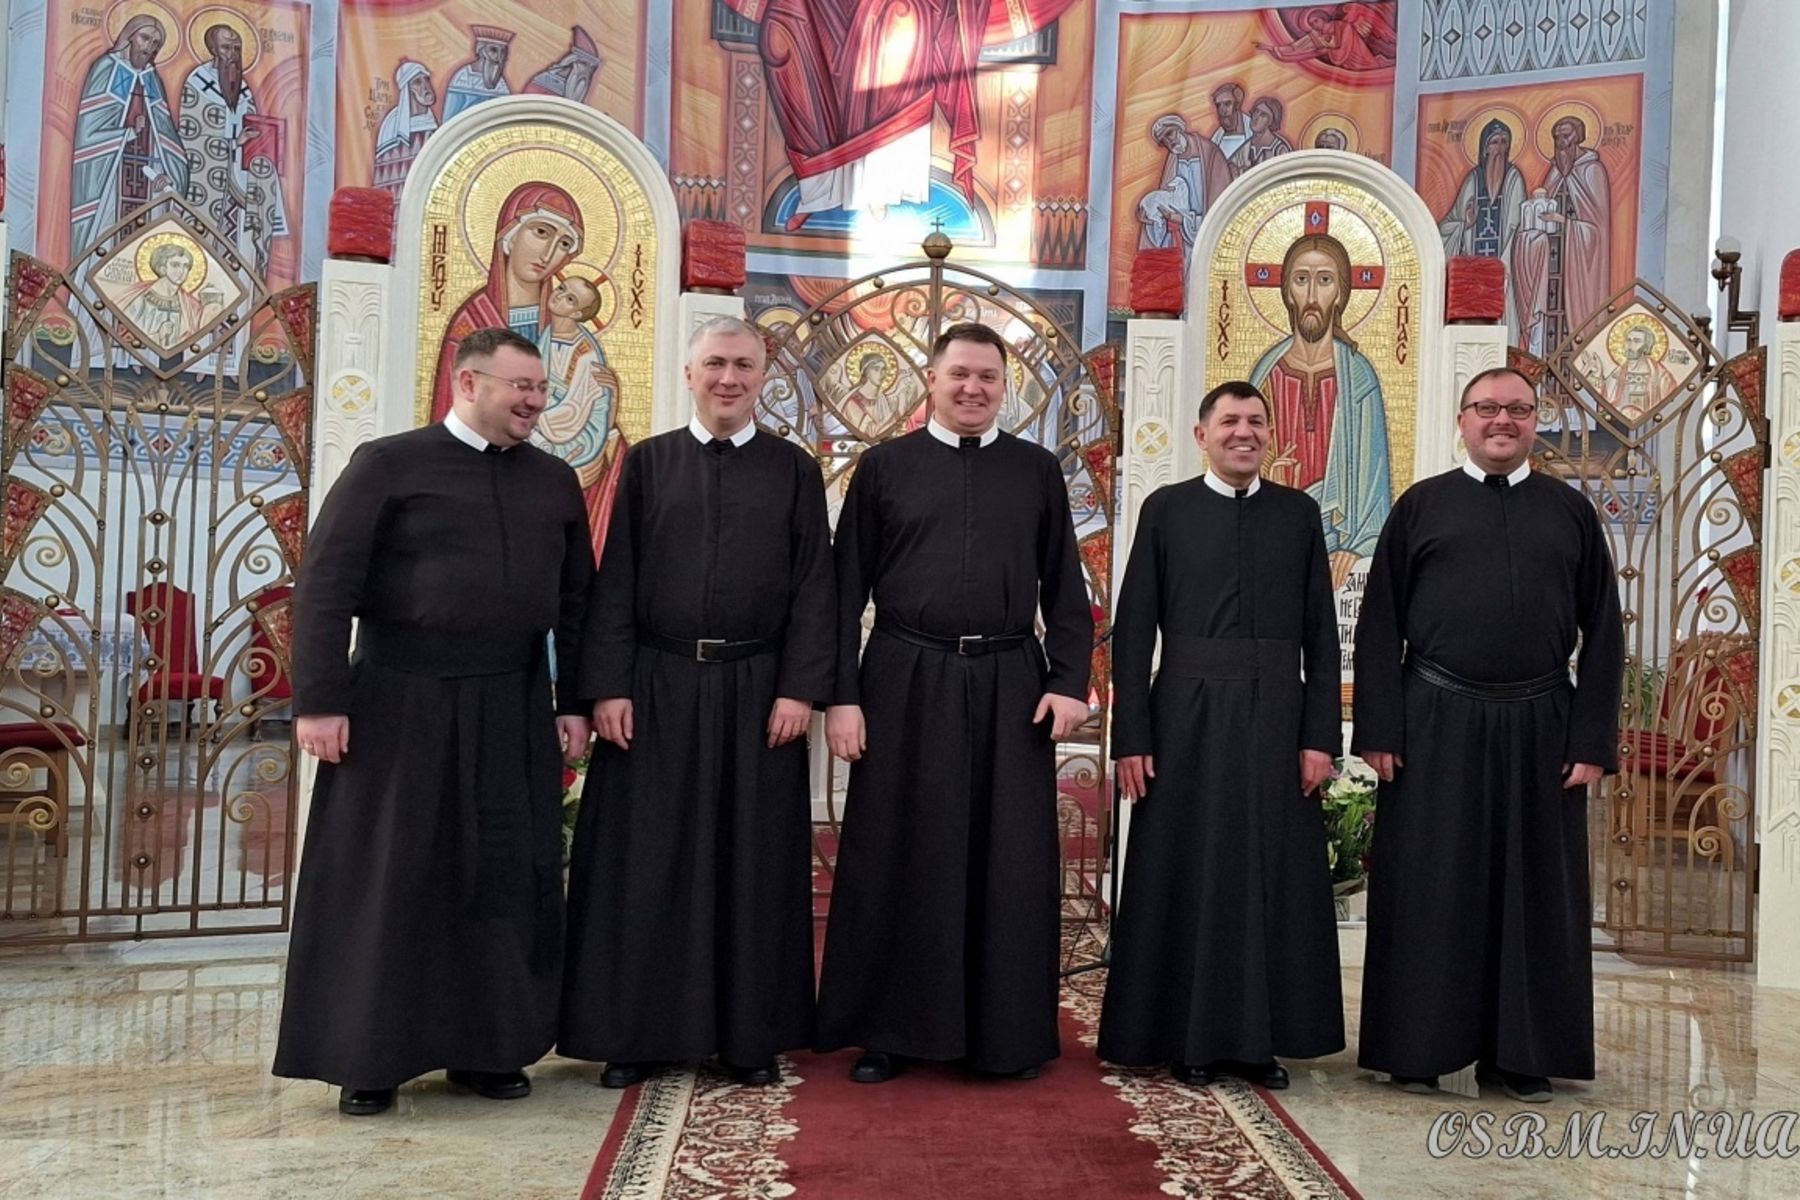 Head of the UGCC to the provincial superior of the Basilians in Ukraine: “Keep the mother who lost her son in your prayers!”